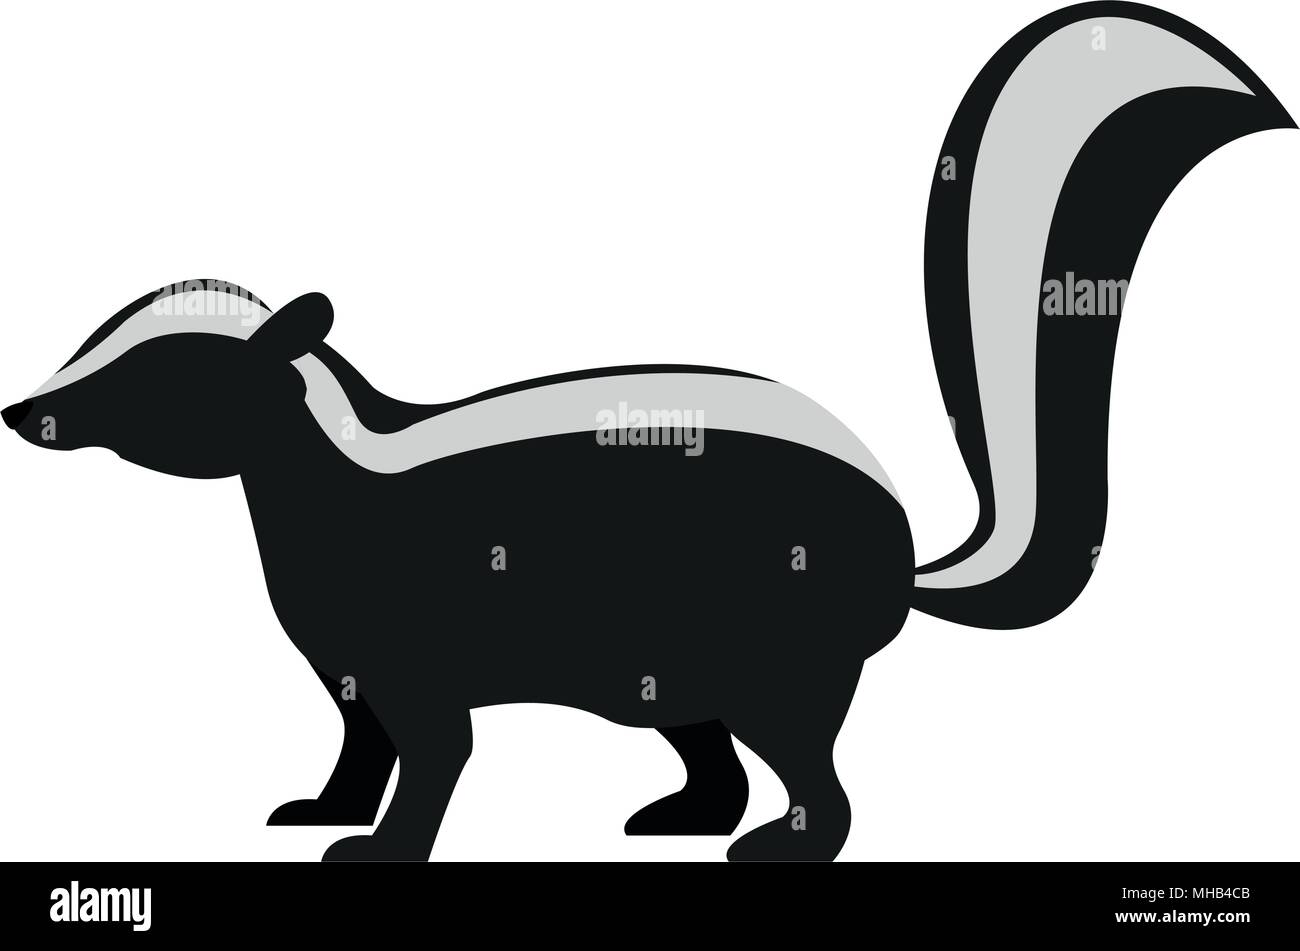 Skunk drawing Stock Vector Images - Page 2 - Alamy